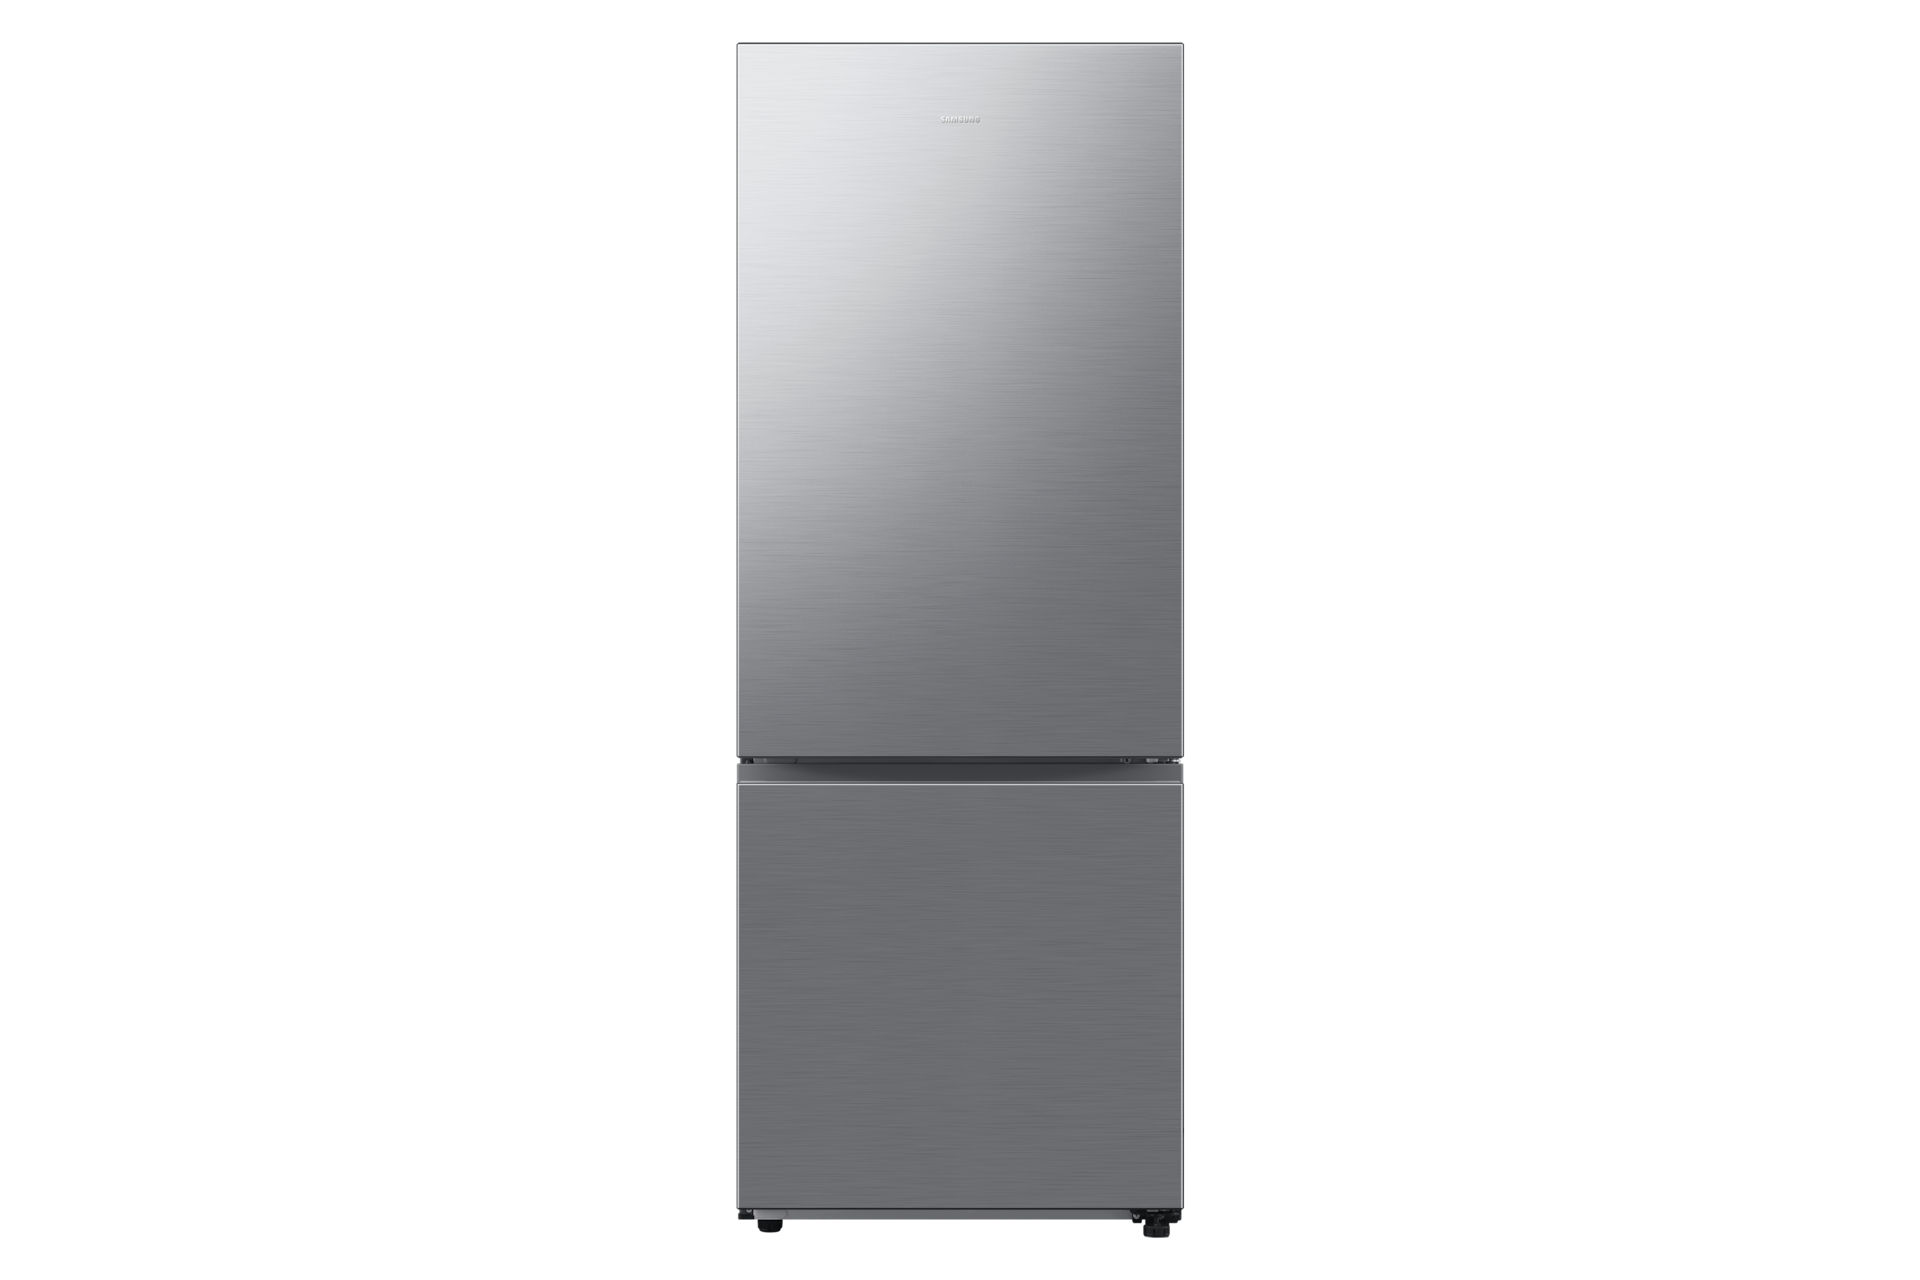 Setting the Temperature in Samsung Frost Free Refrigerator